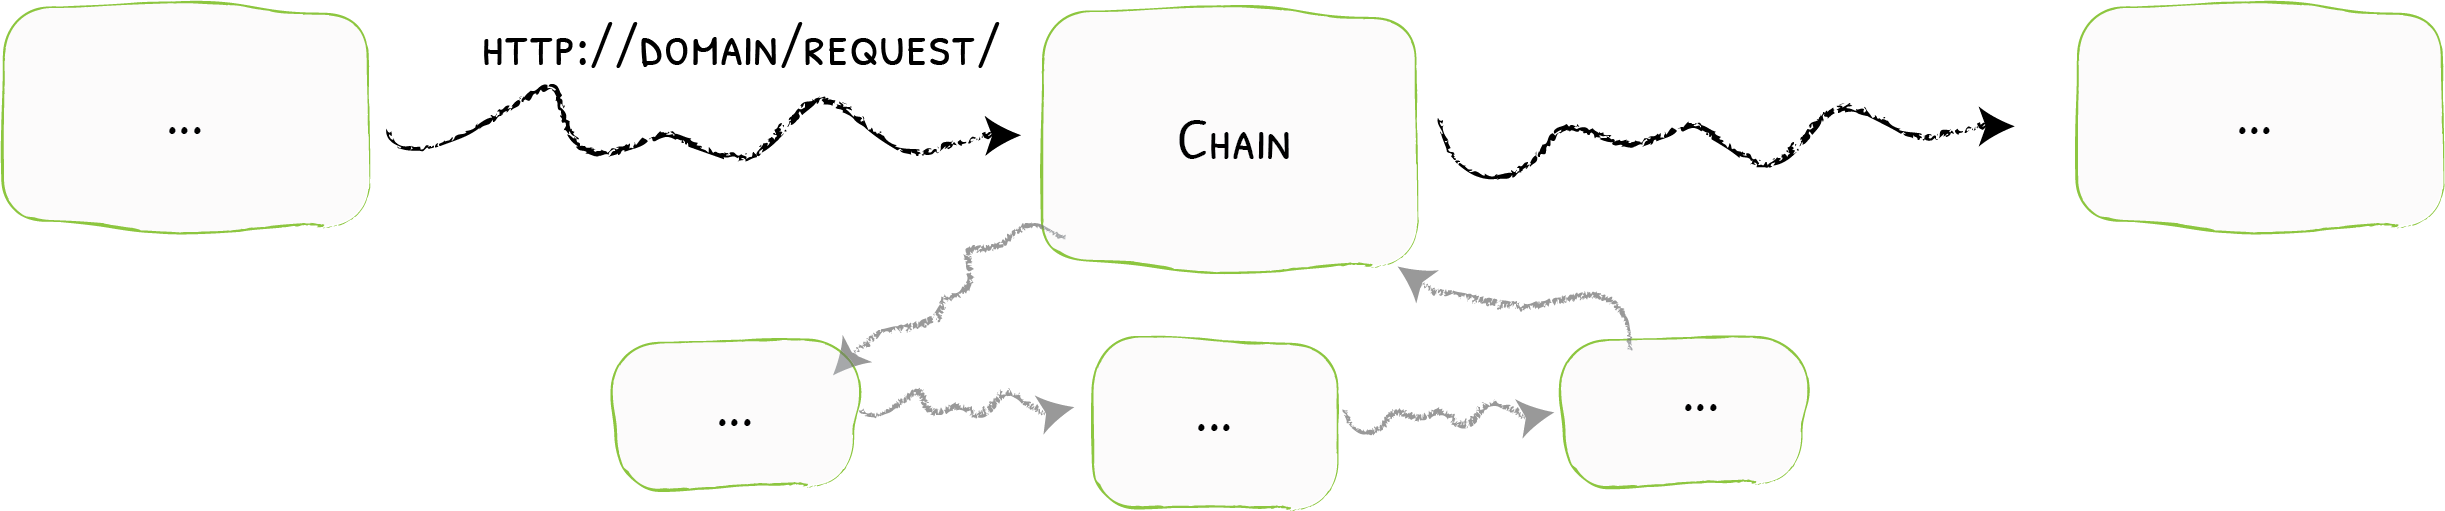 Diagram showing a chain.